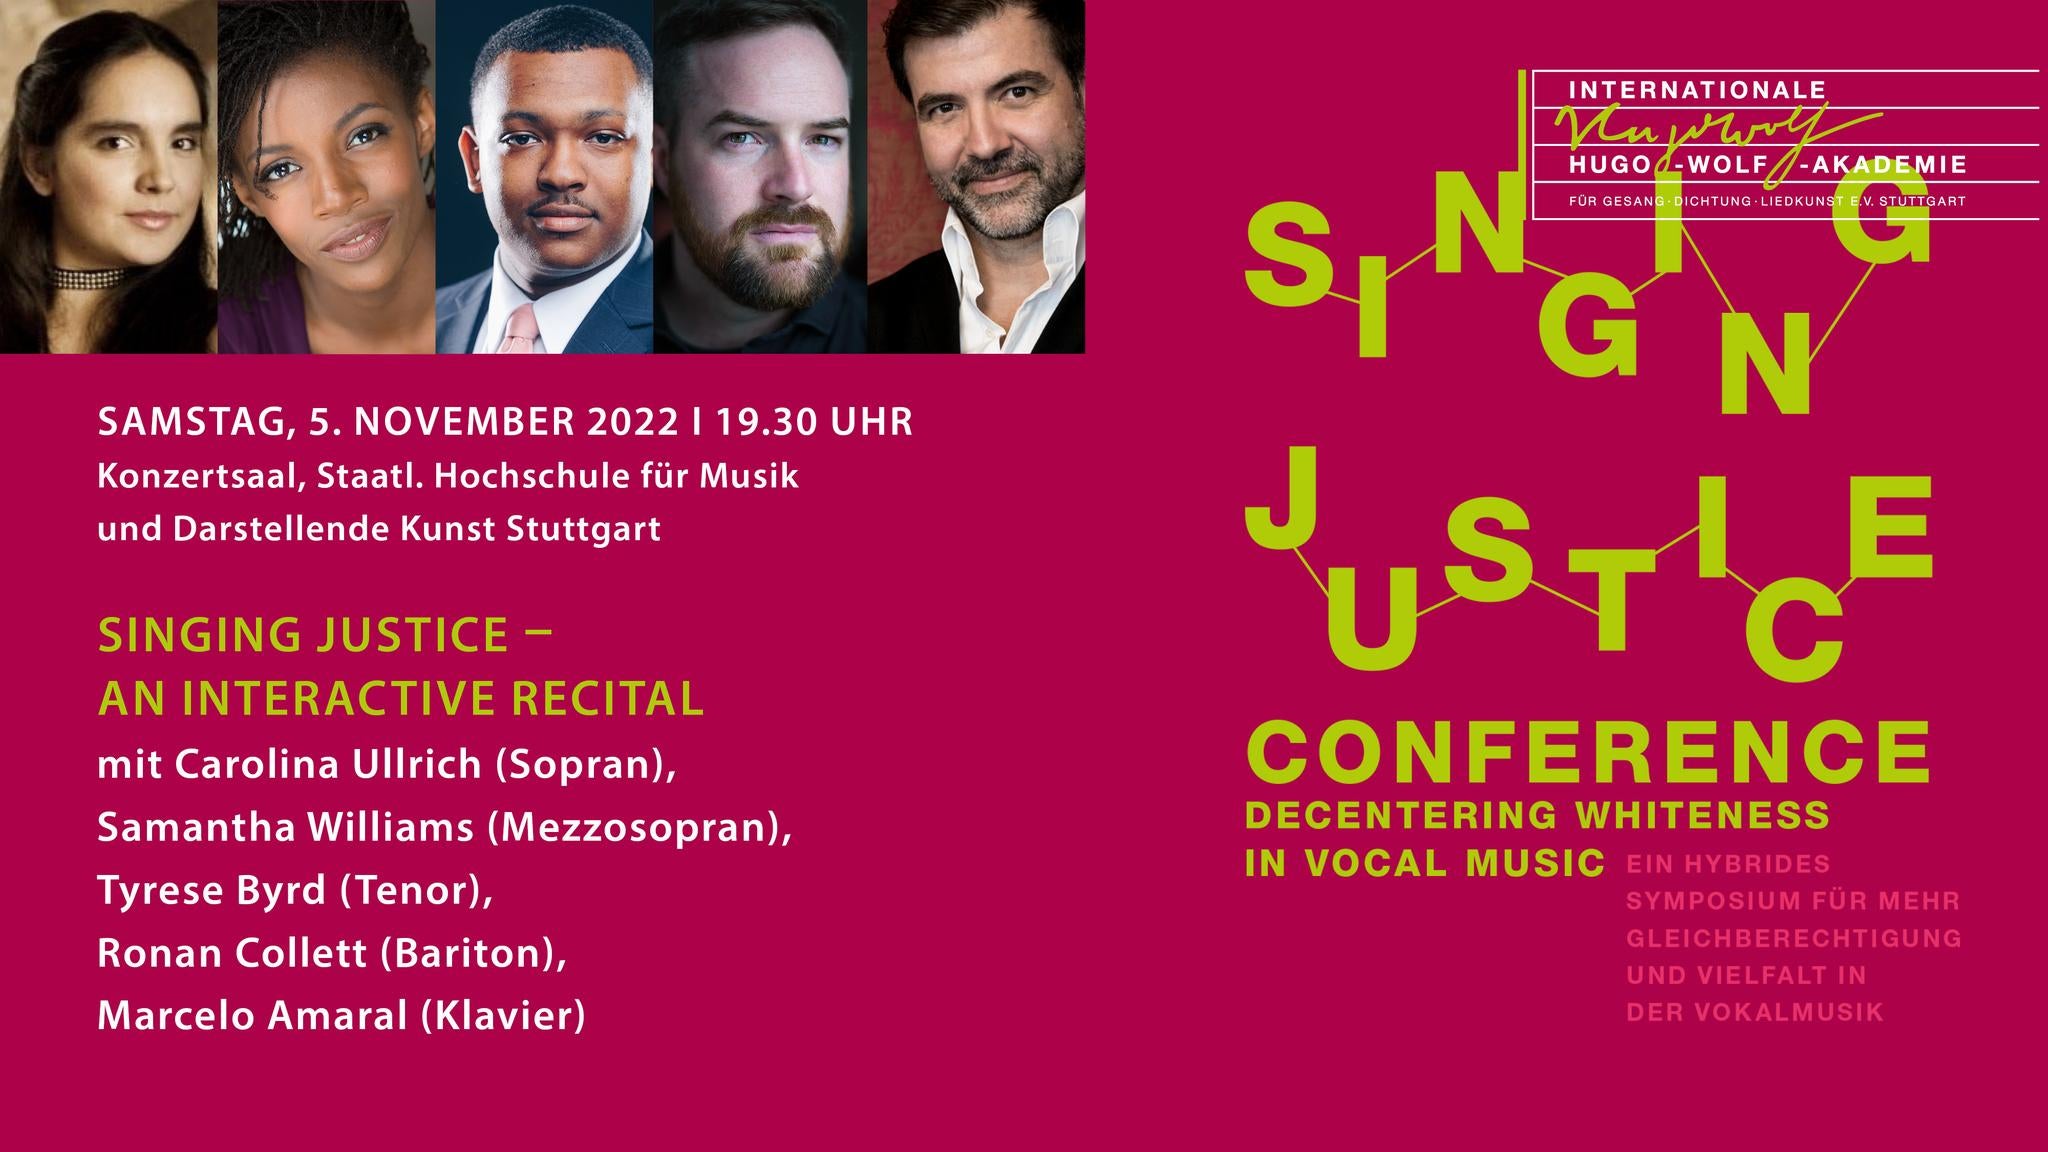 A graphic with a bright pink background and lime green title, with portraits of five vocal performers and text in German and English promoting the Singing Justice conference; with the International Hugo Wolf Academy logo.